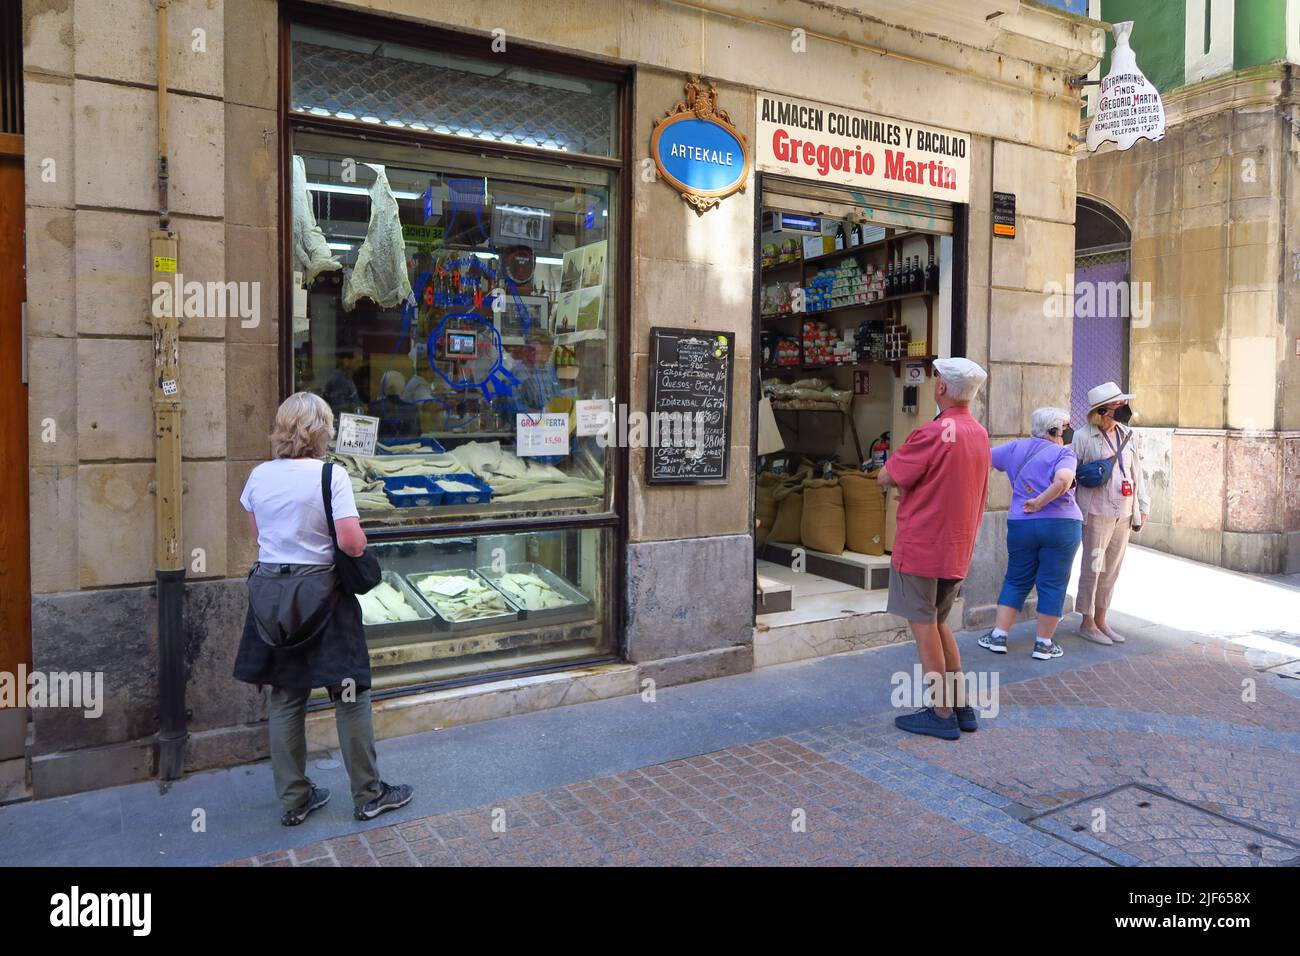 Tourists admire the window display of Gregorio Martin, a traditional salted cod shop on Artekale in the old town of the Spanish city of Bilbao Stock Photo